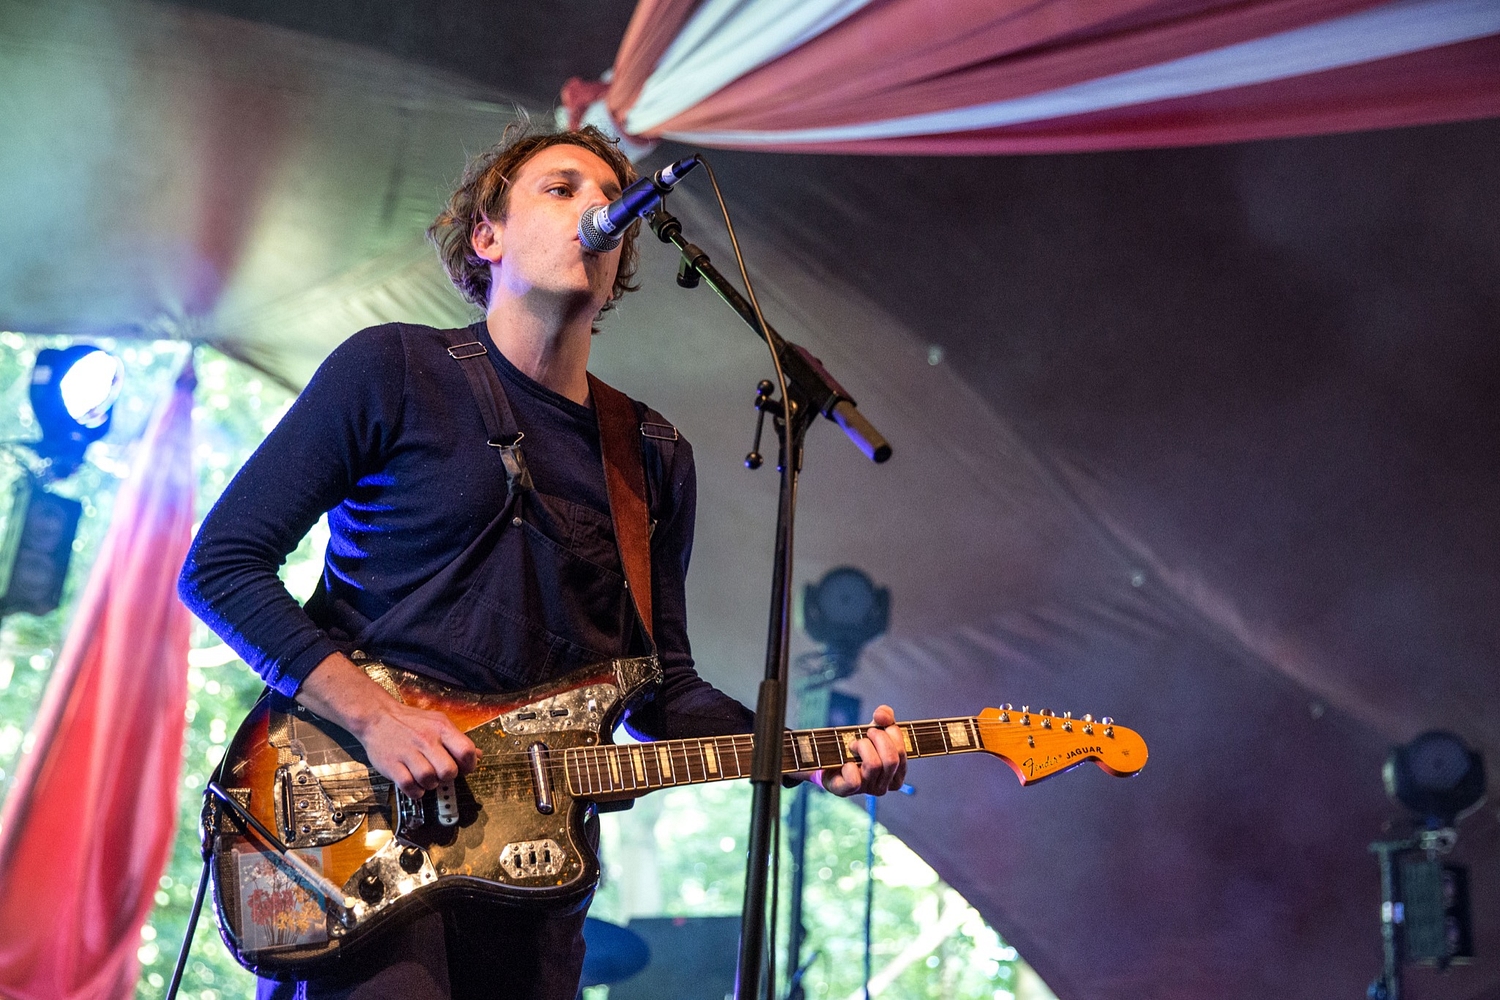 Methyl Ethel have announced a new London date